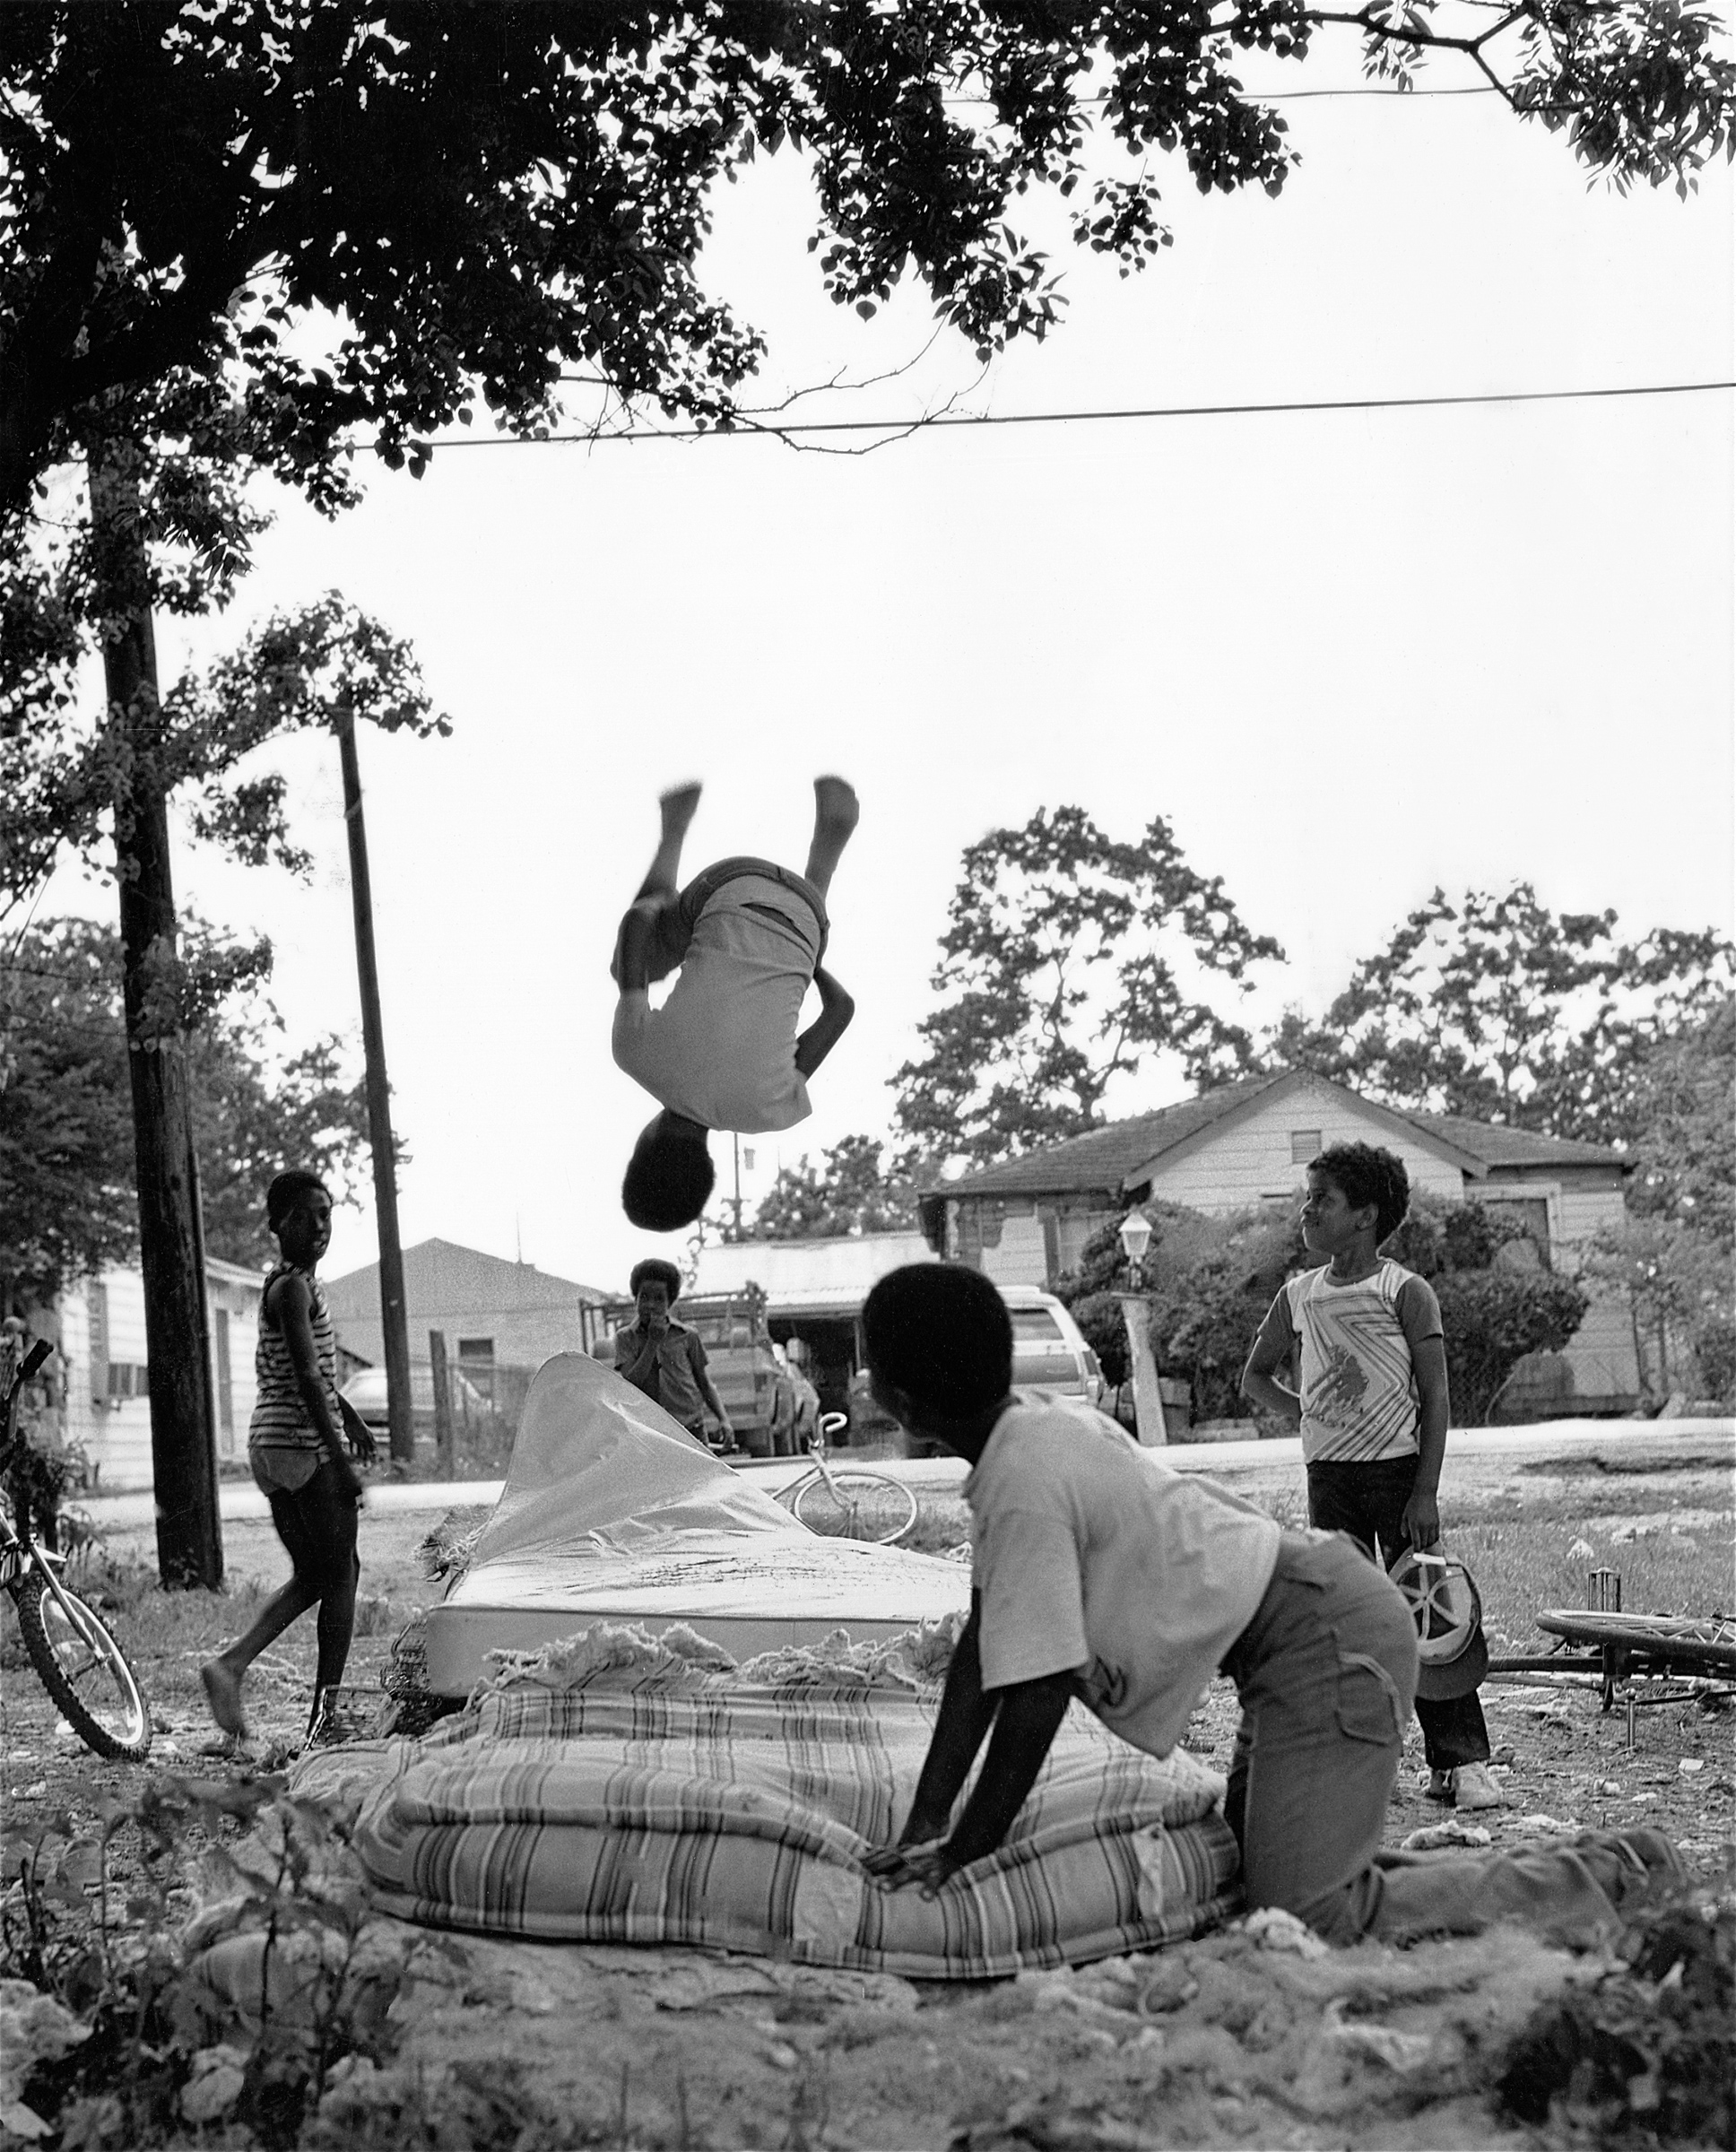 Bouncing Boys (1981). “The yard becomes an extension of the house when it’s hot out,” Earlie says. “In the inner city, people learn how to improvise to live and survive.” (Earlie Hudnall Jr.)